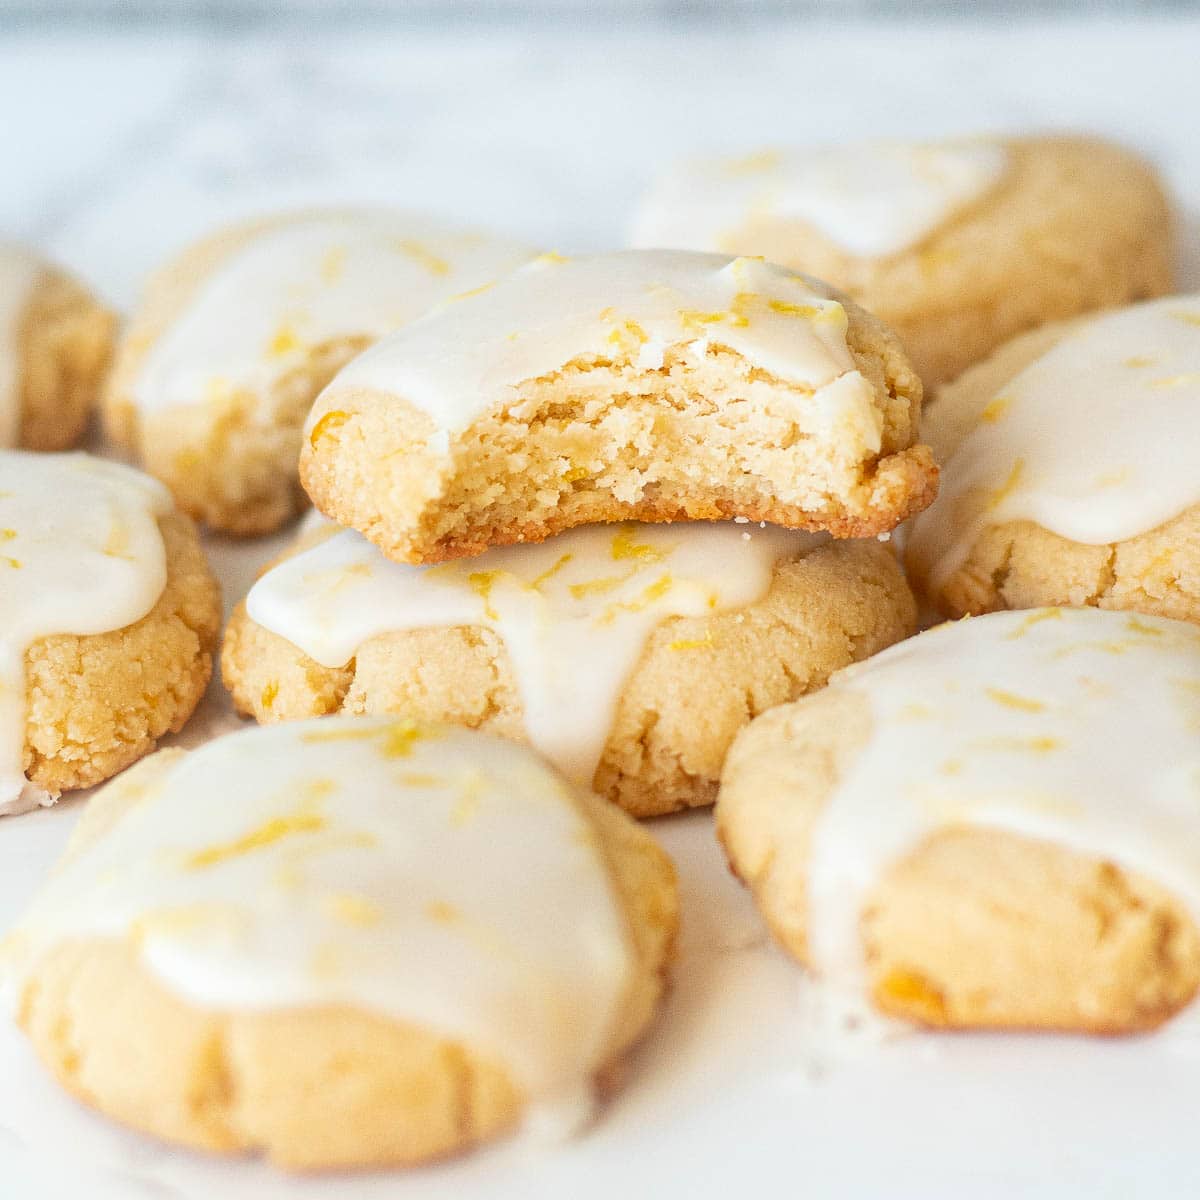 A close-up view of almond lemon cookies, one with a bite taken out on top.